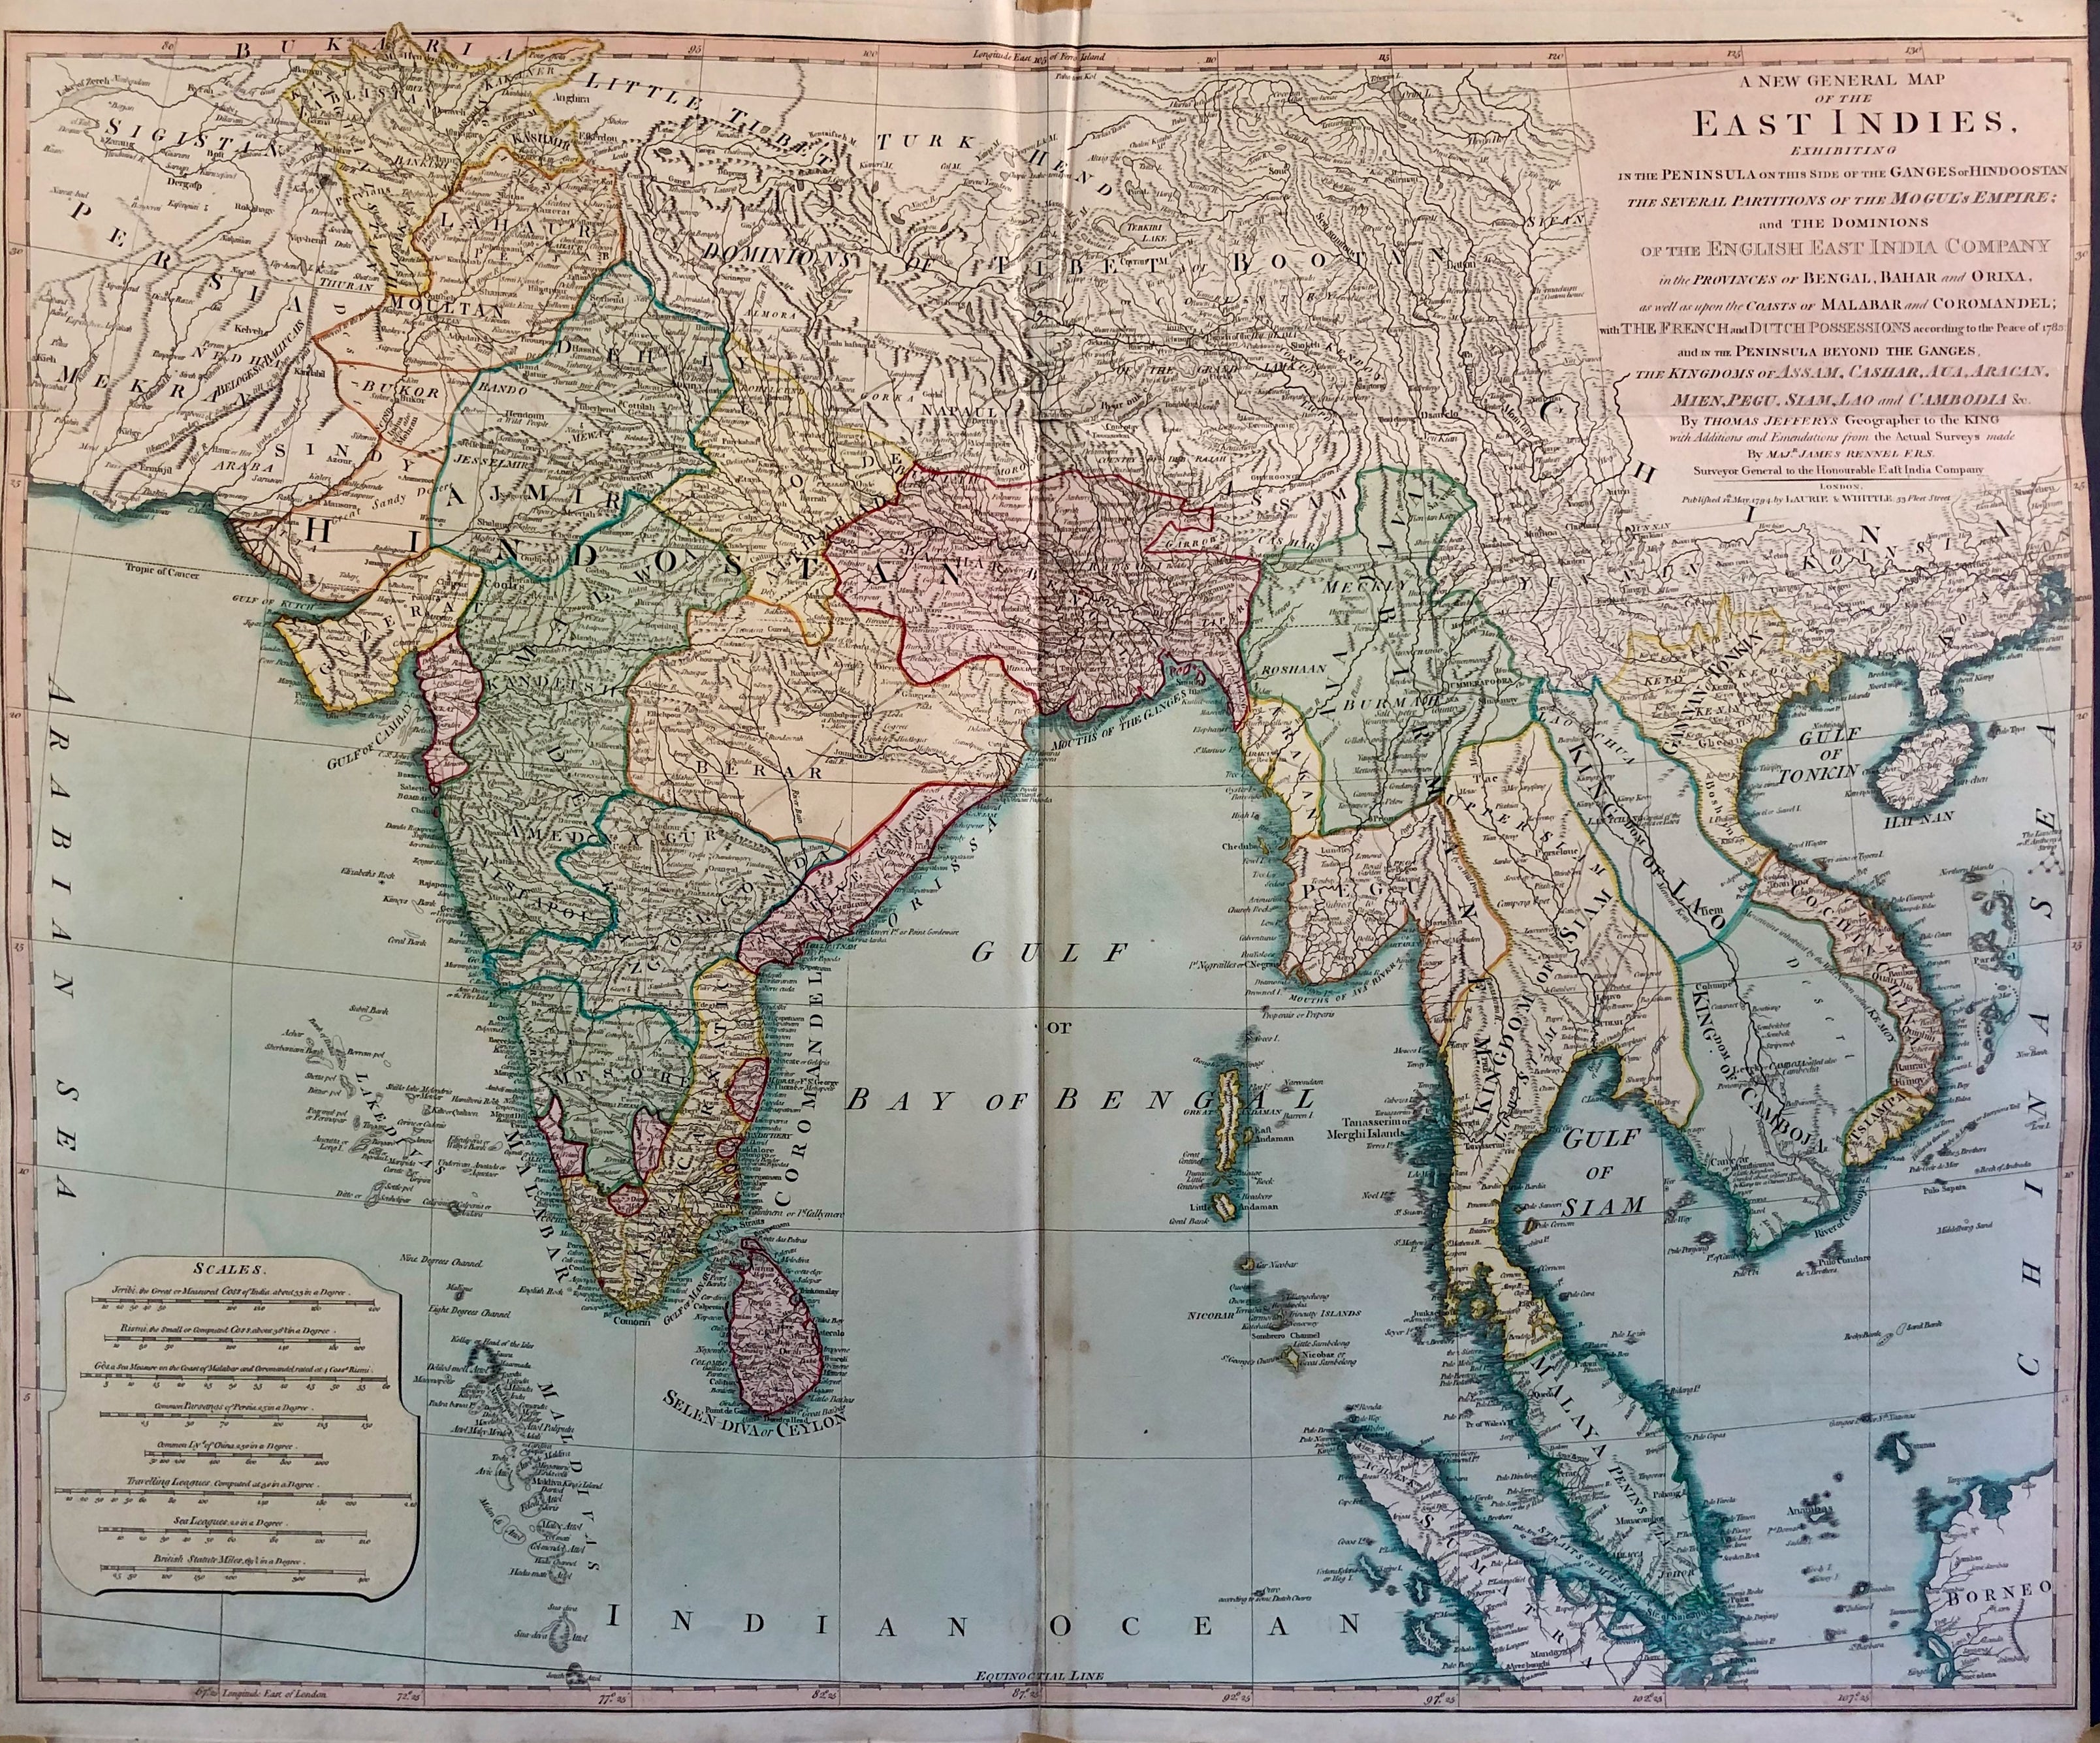 A NEW GENERAL MAP OF THE EAST INDIES ...